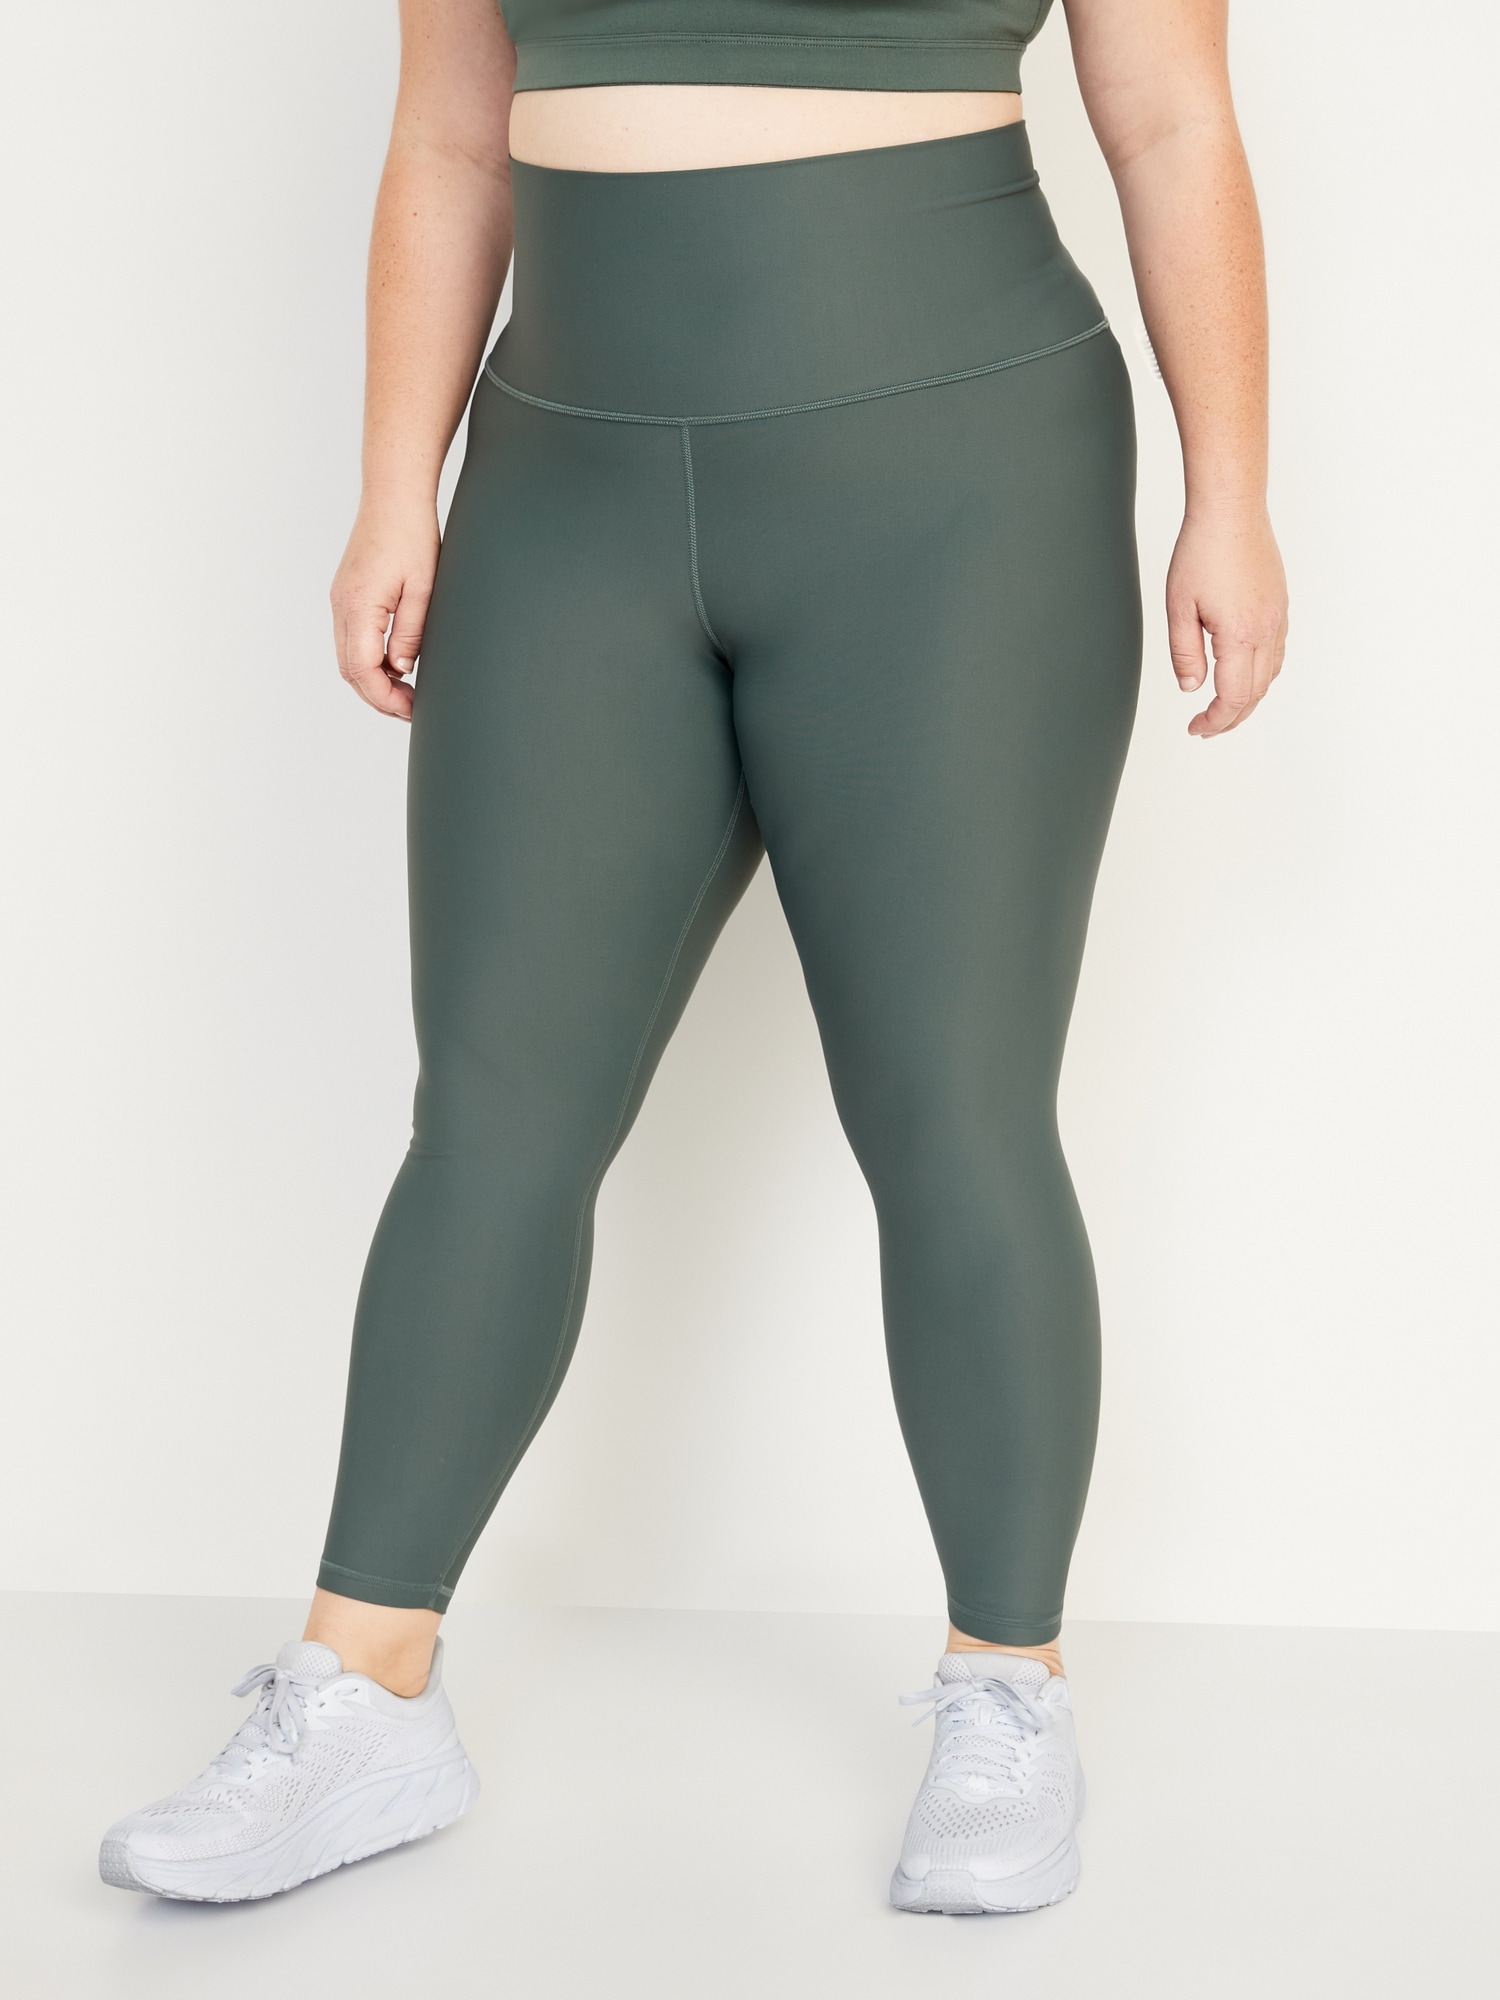 Extra High-Waisted PowerSoft Leggings for Women, Old Navy